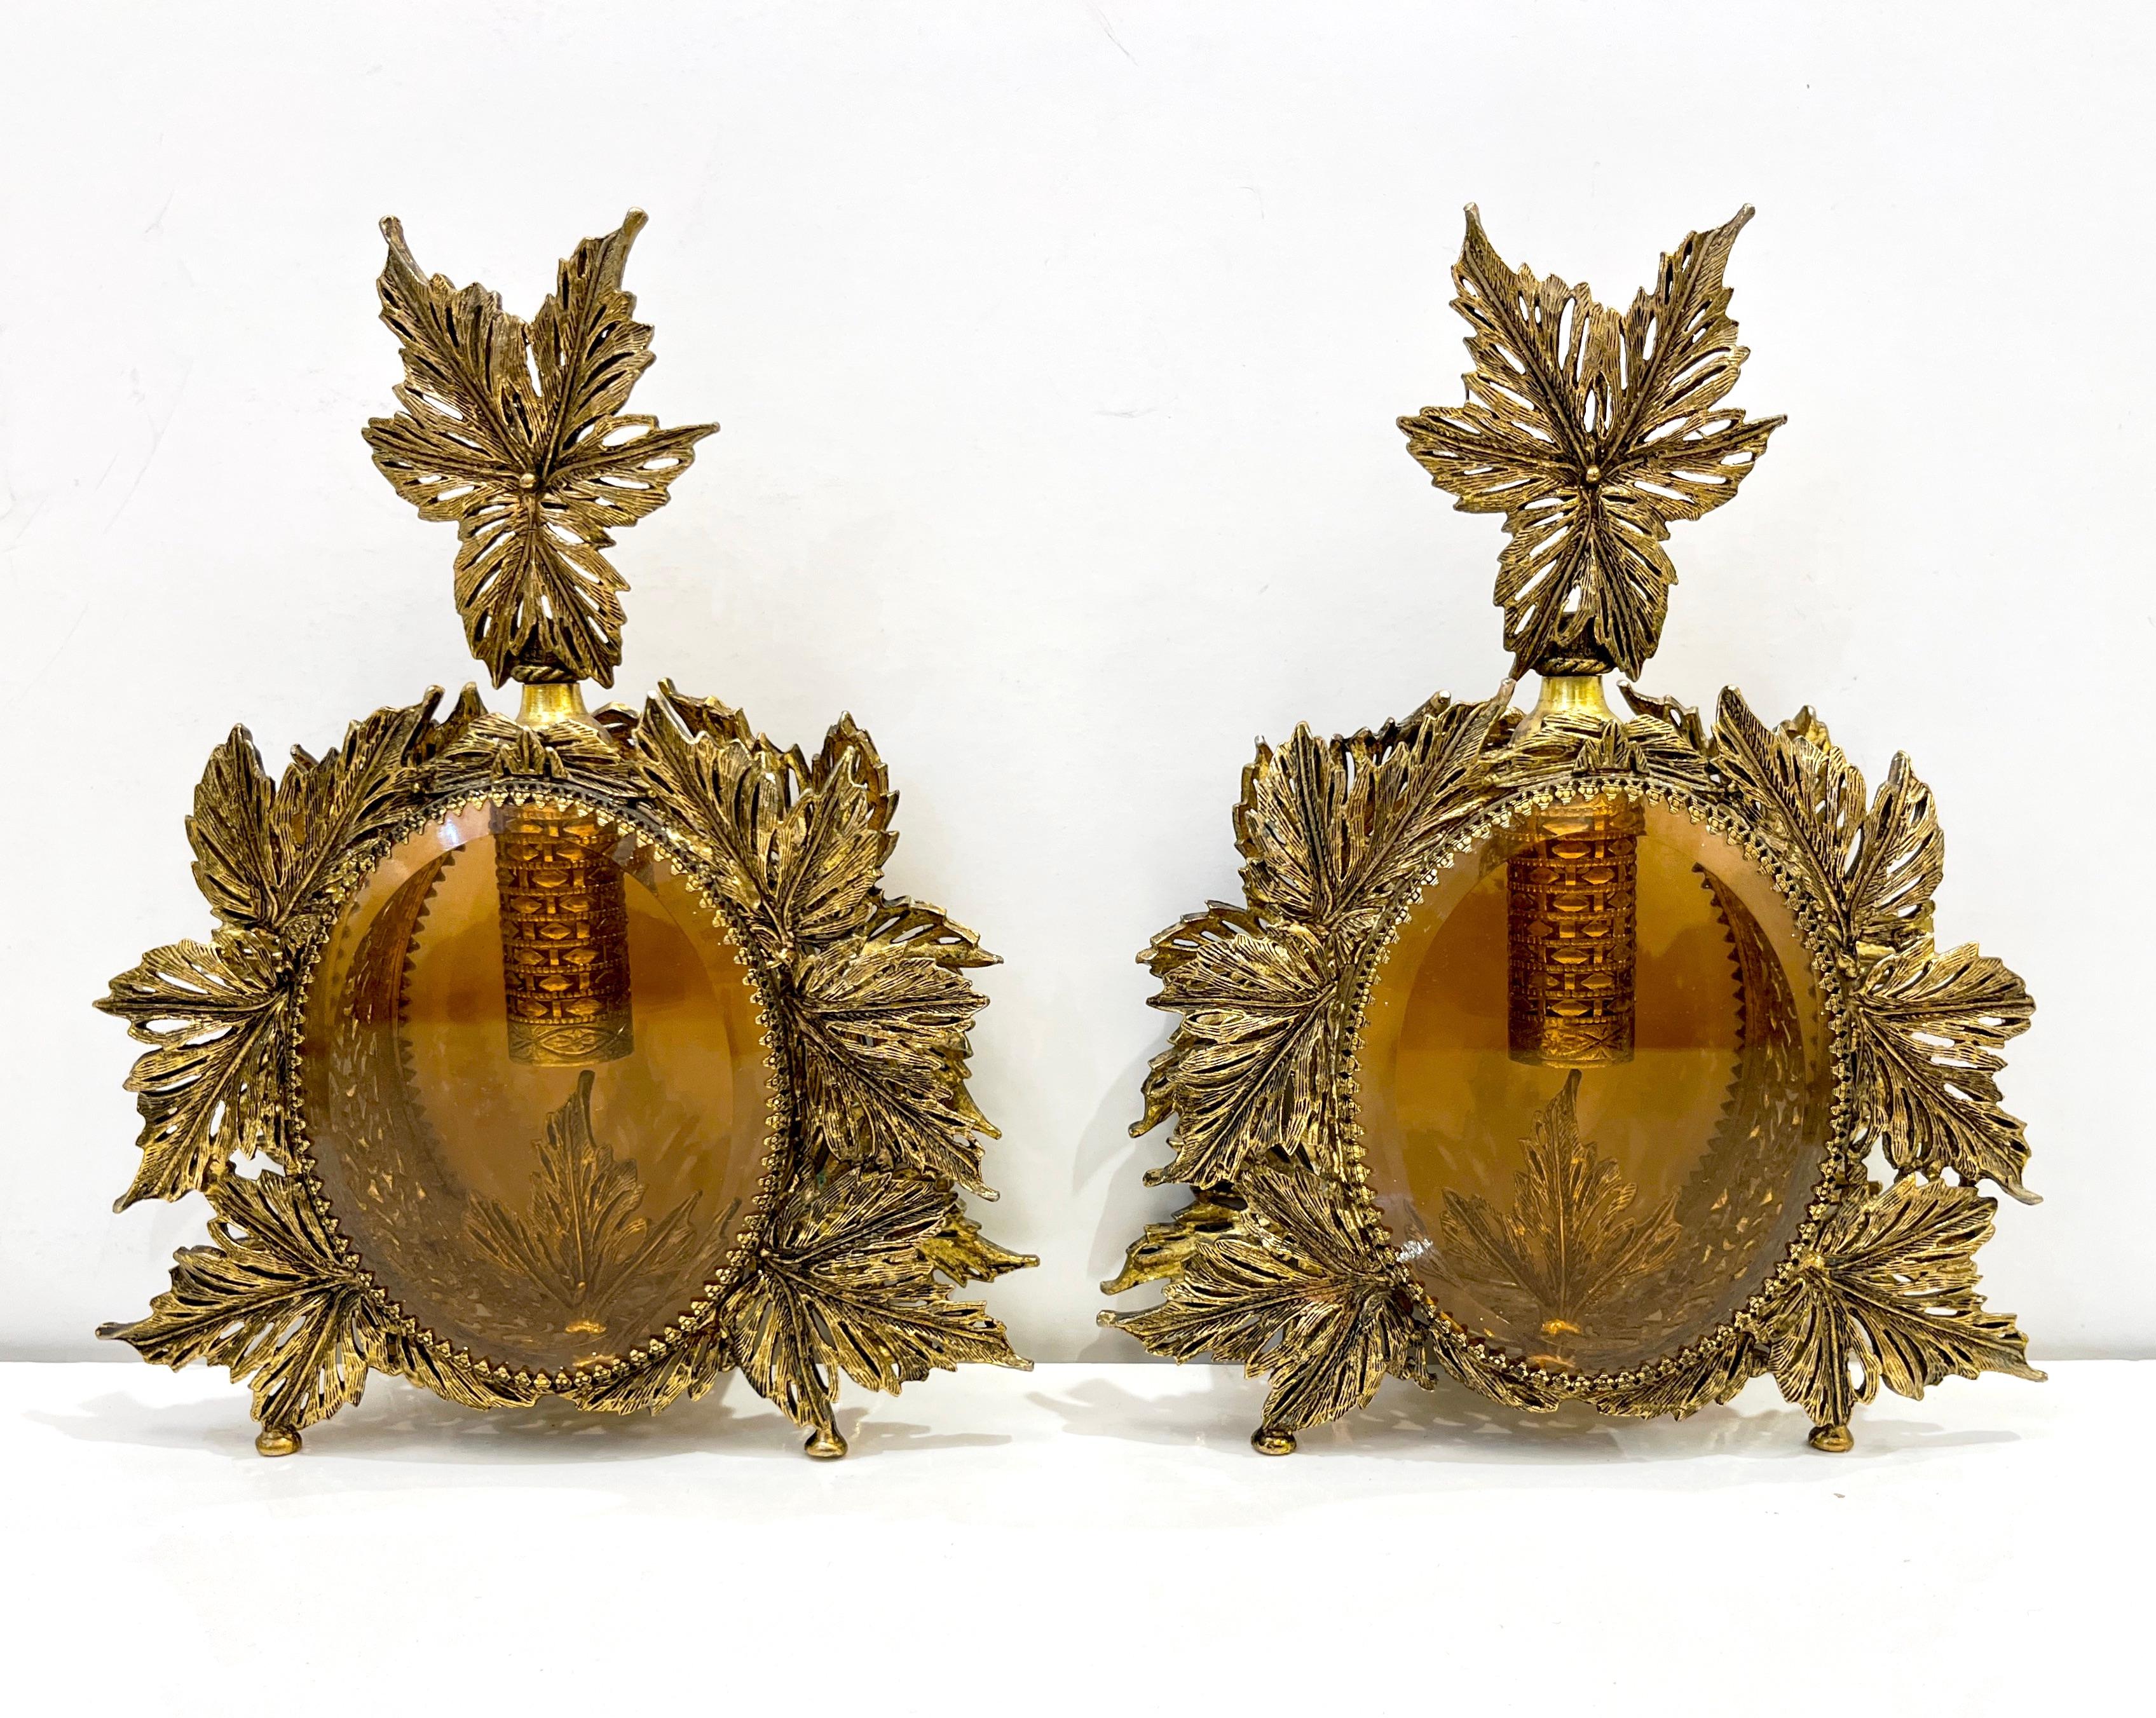 A delightful French luxury pair of antique oversized Ormolu perfume bottles in excellent condition, of the Hollywood Regency period. Extensive Art Nouveau decoration for the pierced and filigree brass work, with perforated leaves all around and on